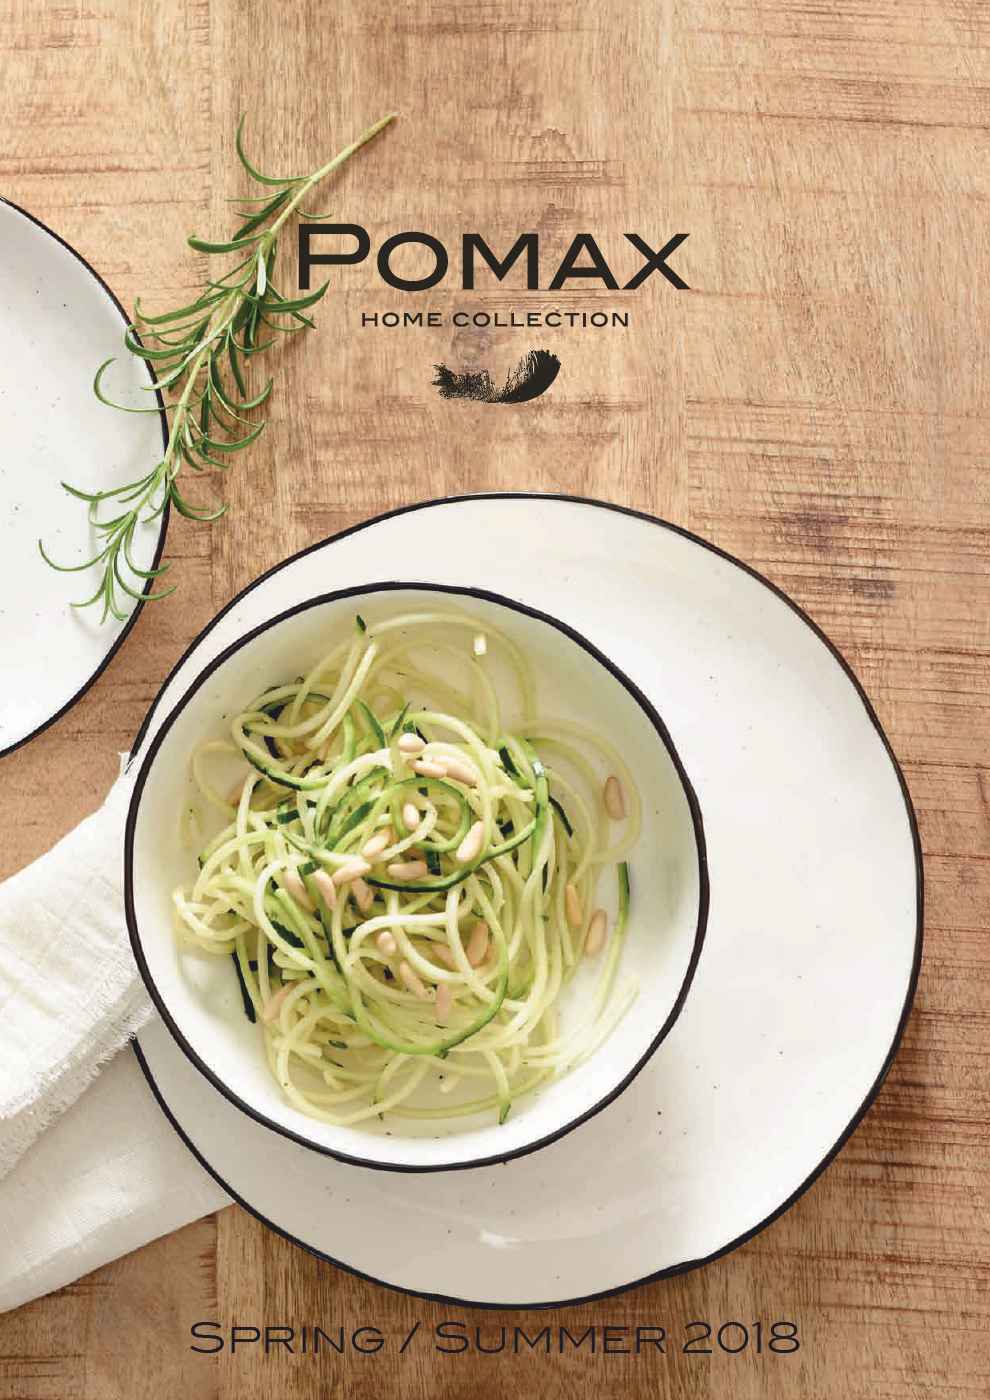 POMAX Home Collection 